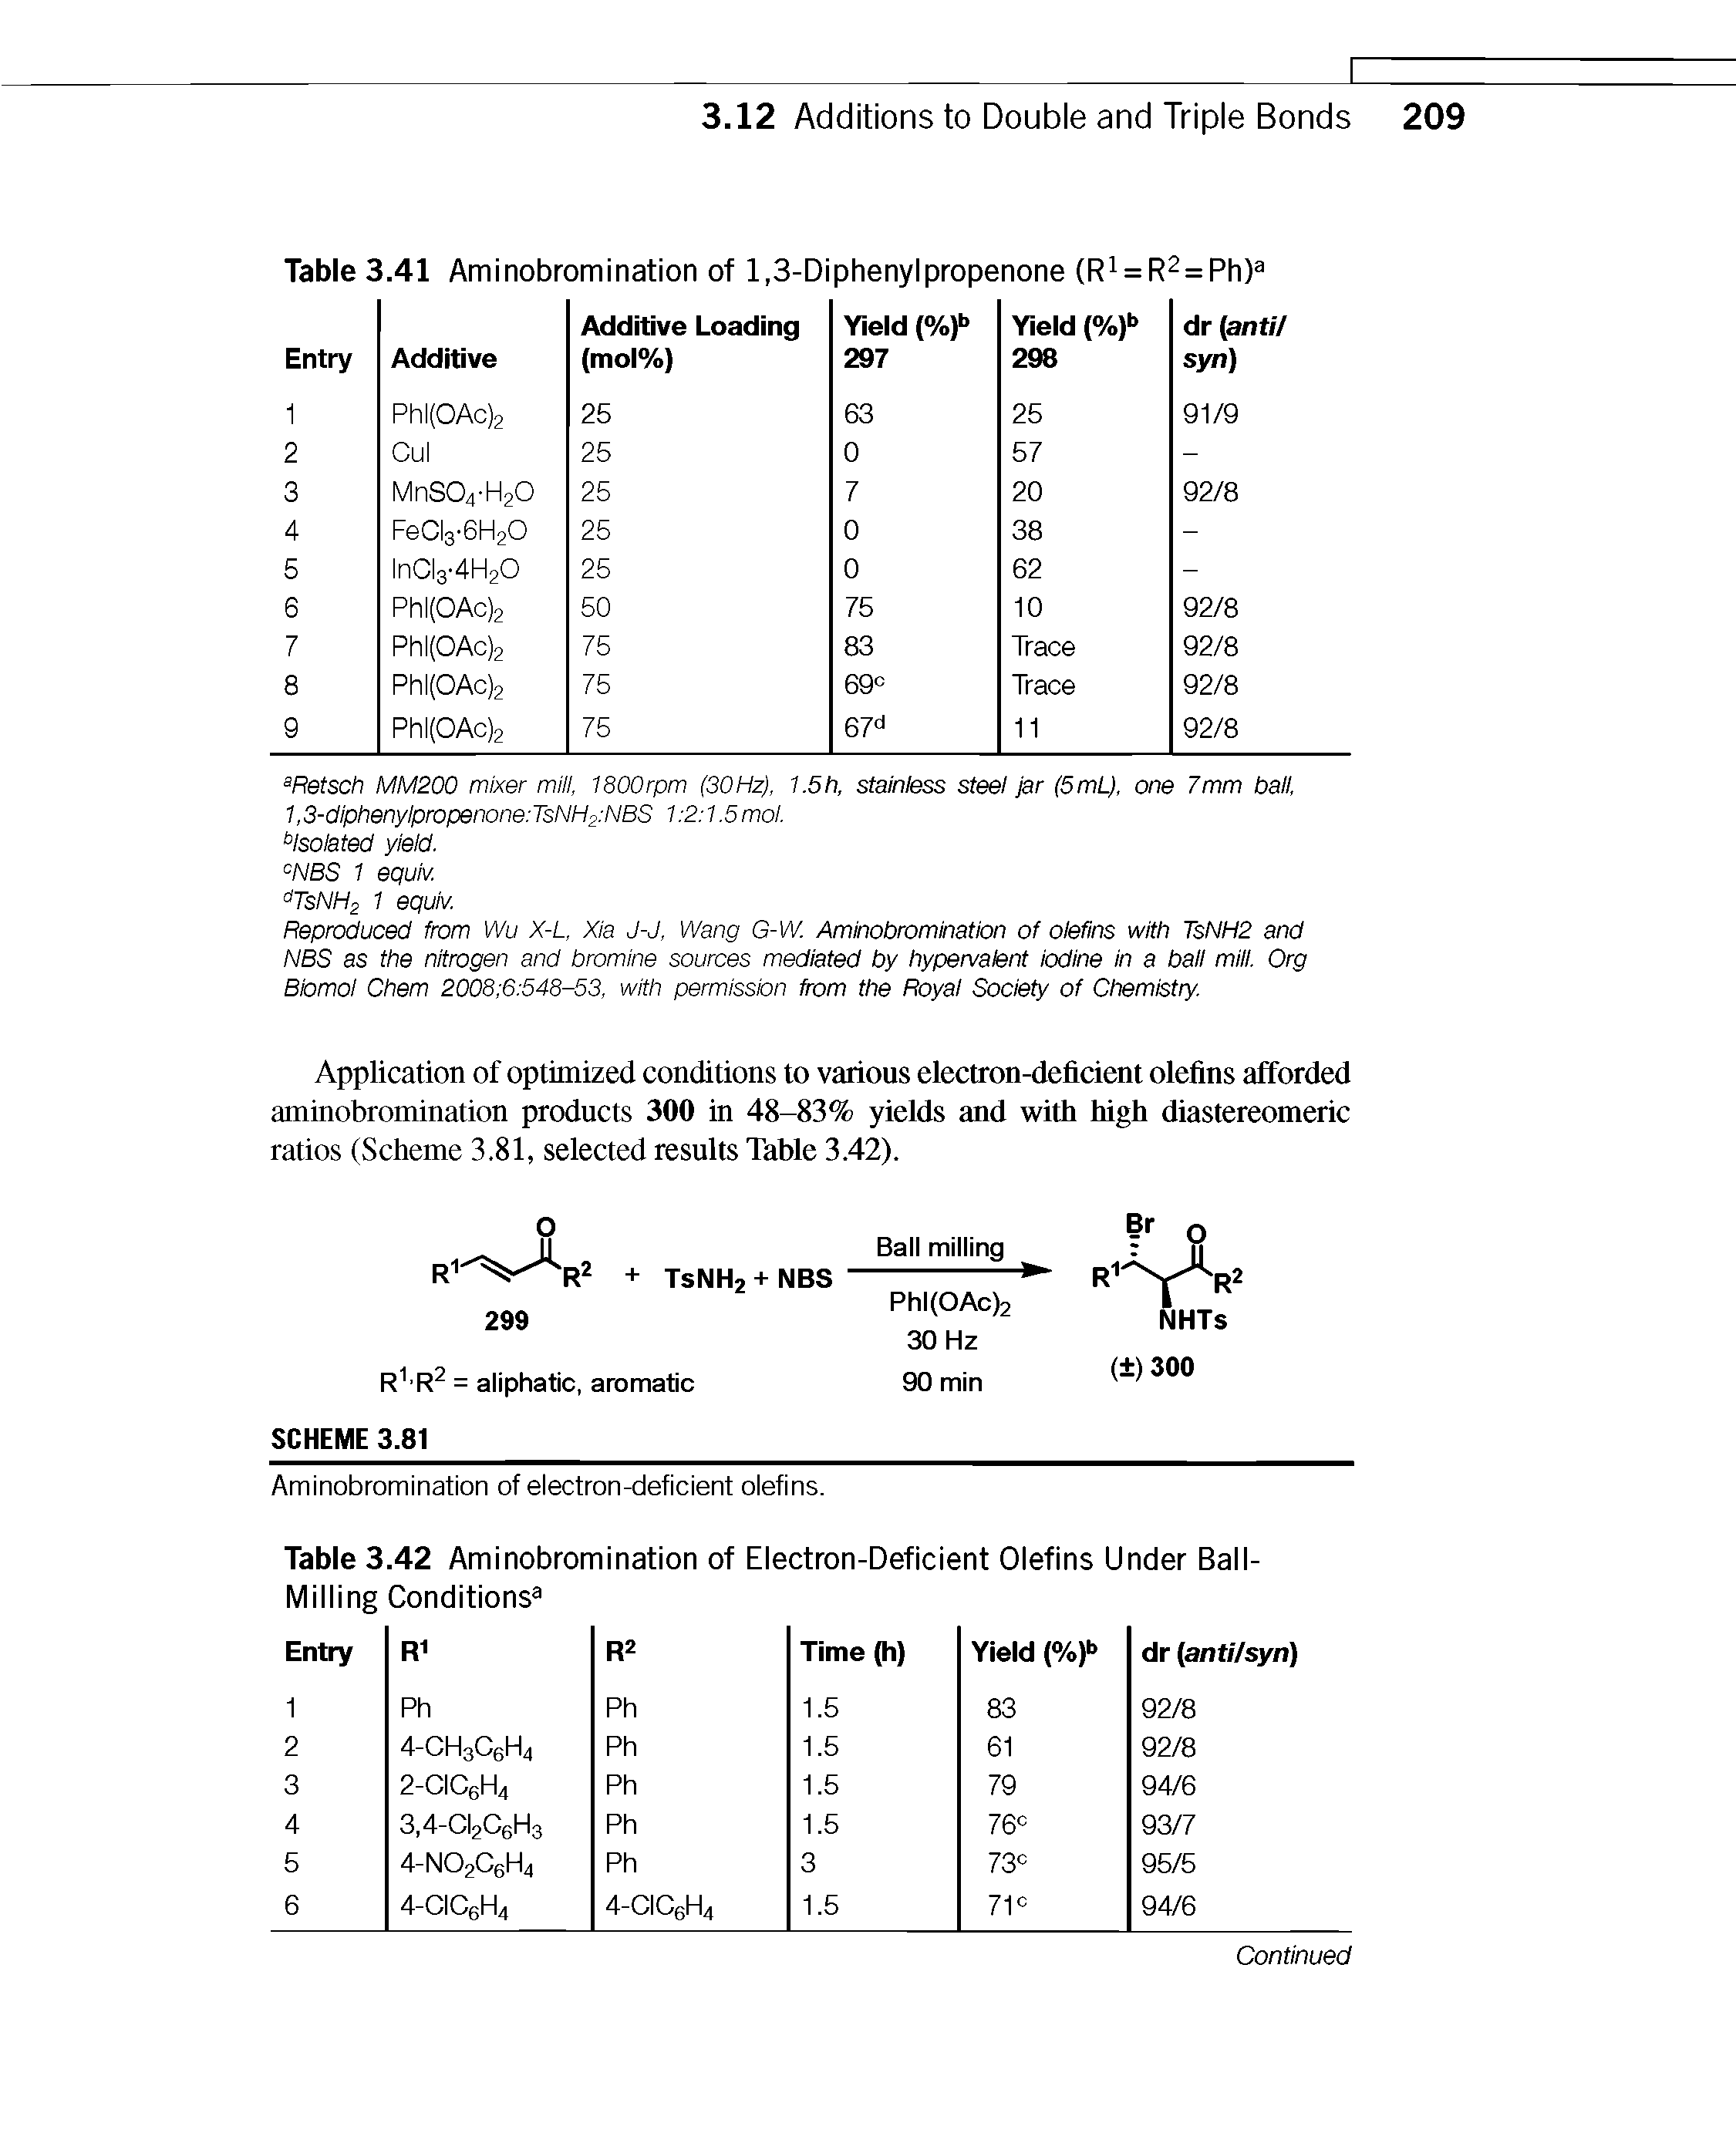 Table 3.42 Aminobromination of Electron-Deficient Olefins Under Ball-Milling Conditions ...